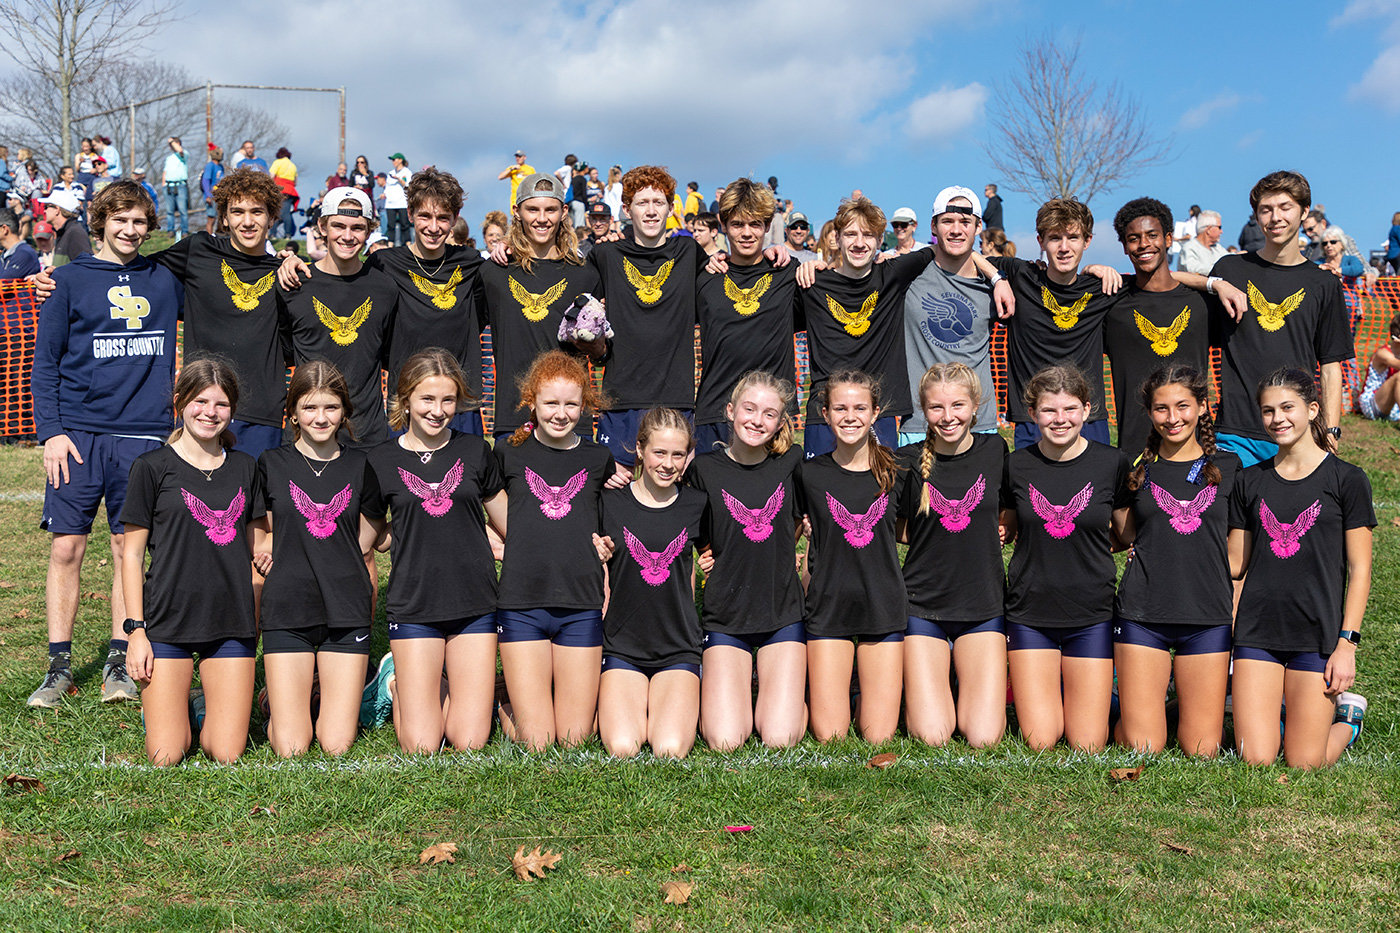 The Falcons swept states by winning championships on the boys and girls sides at Hereford High School on November 12.